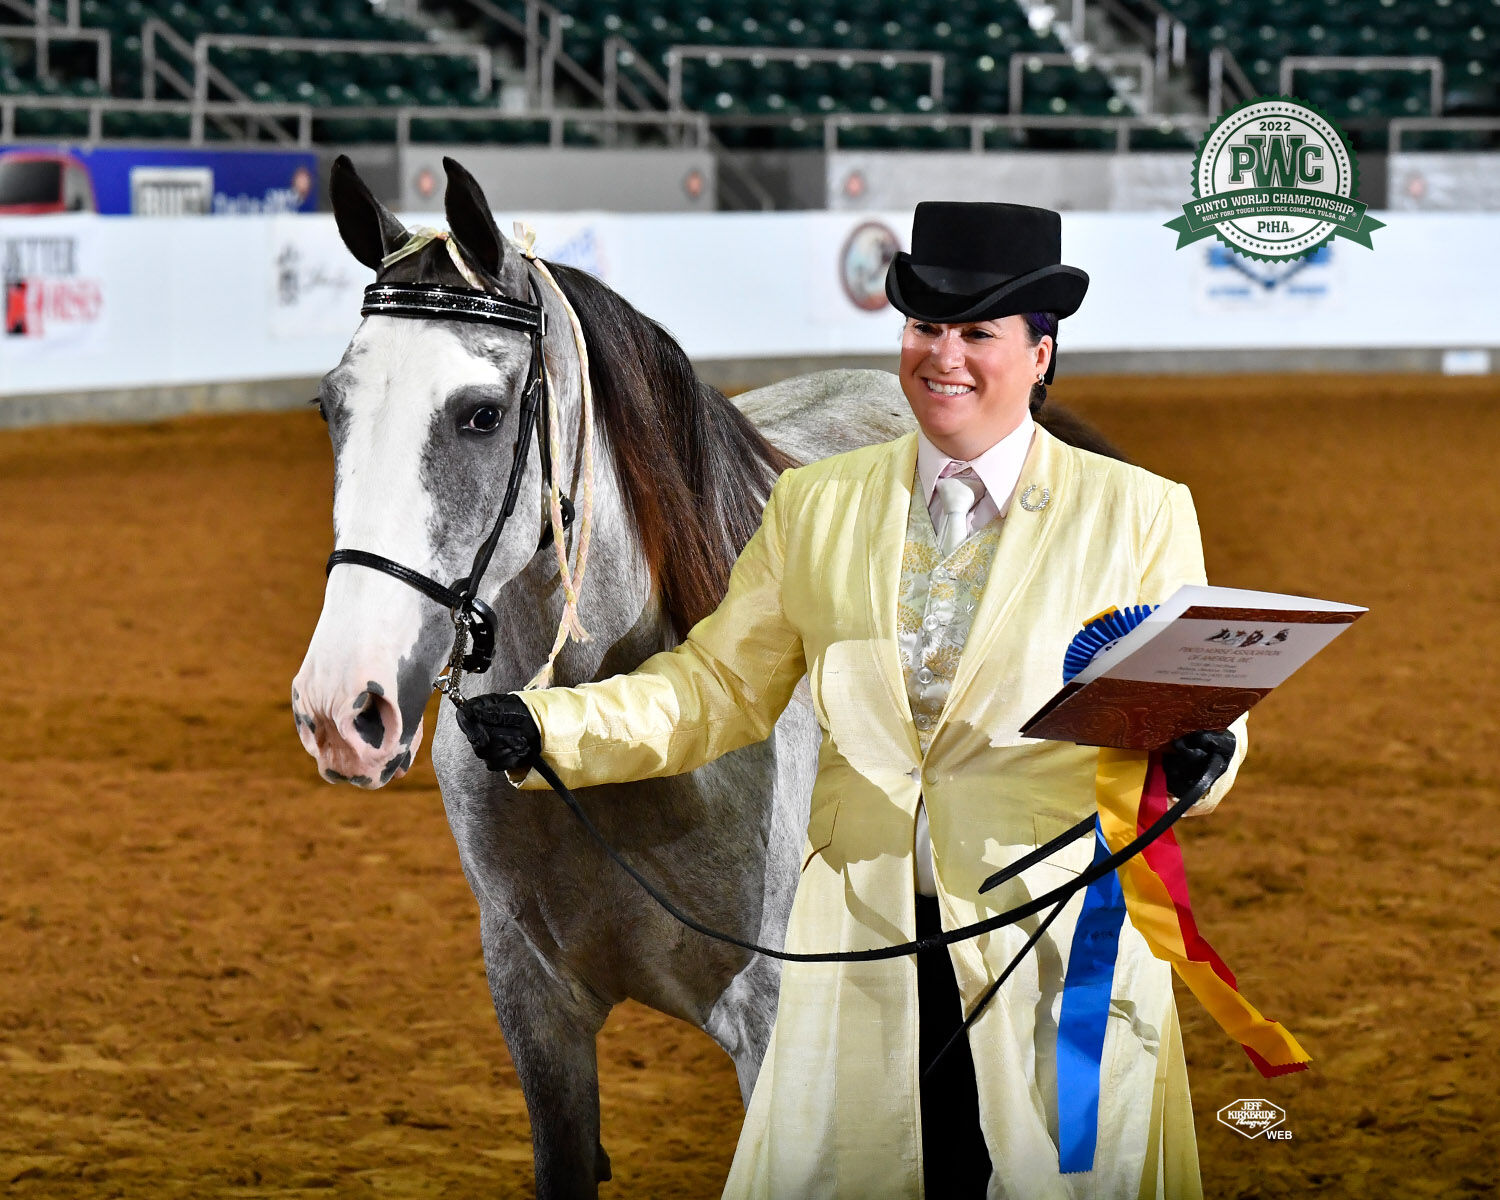 Bristol woman is five-time equestrian champ